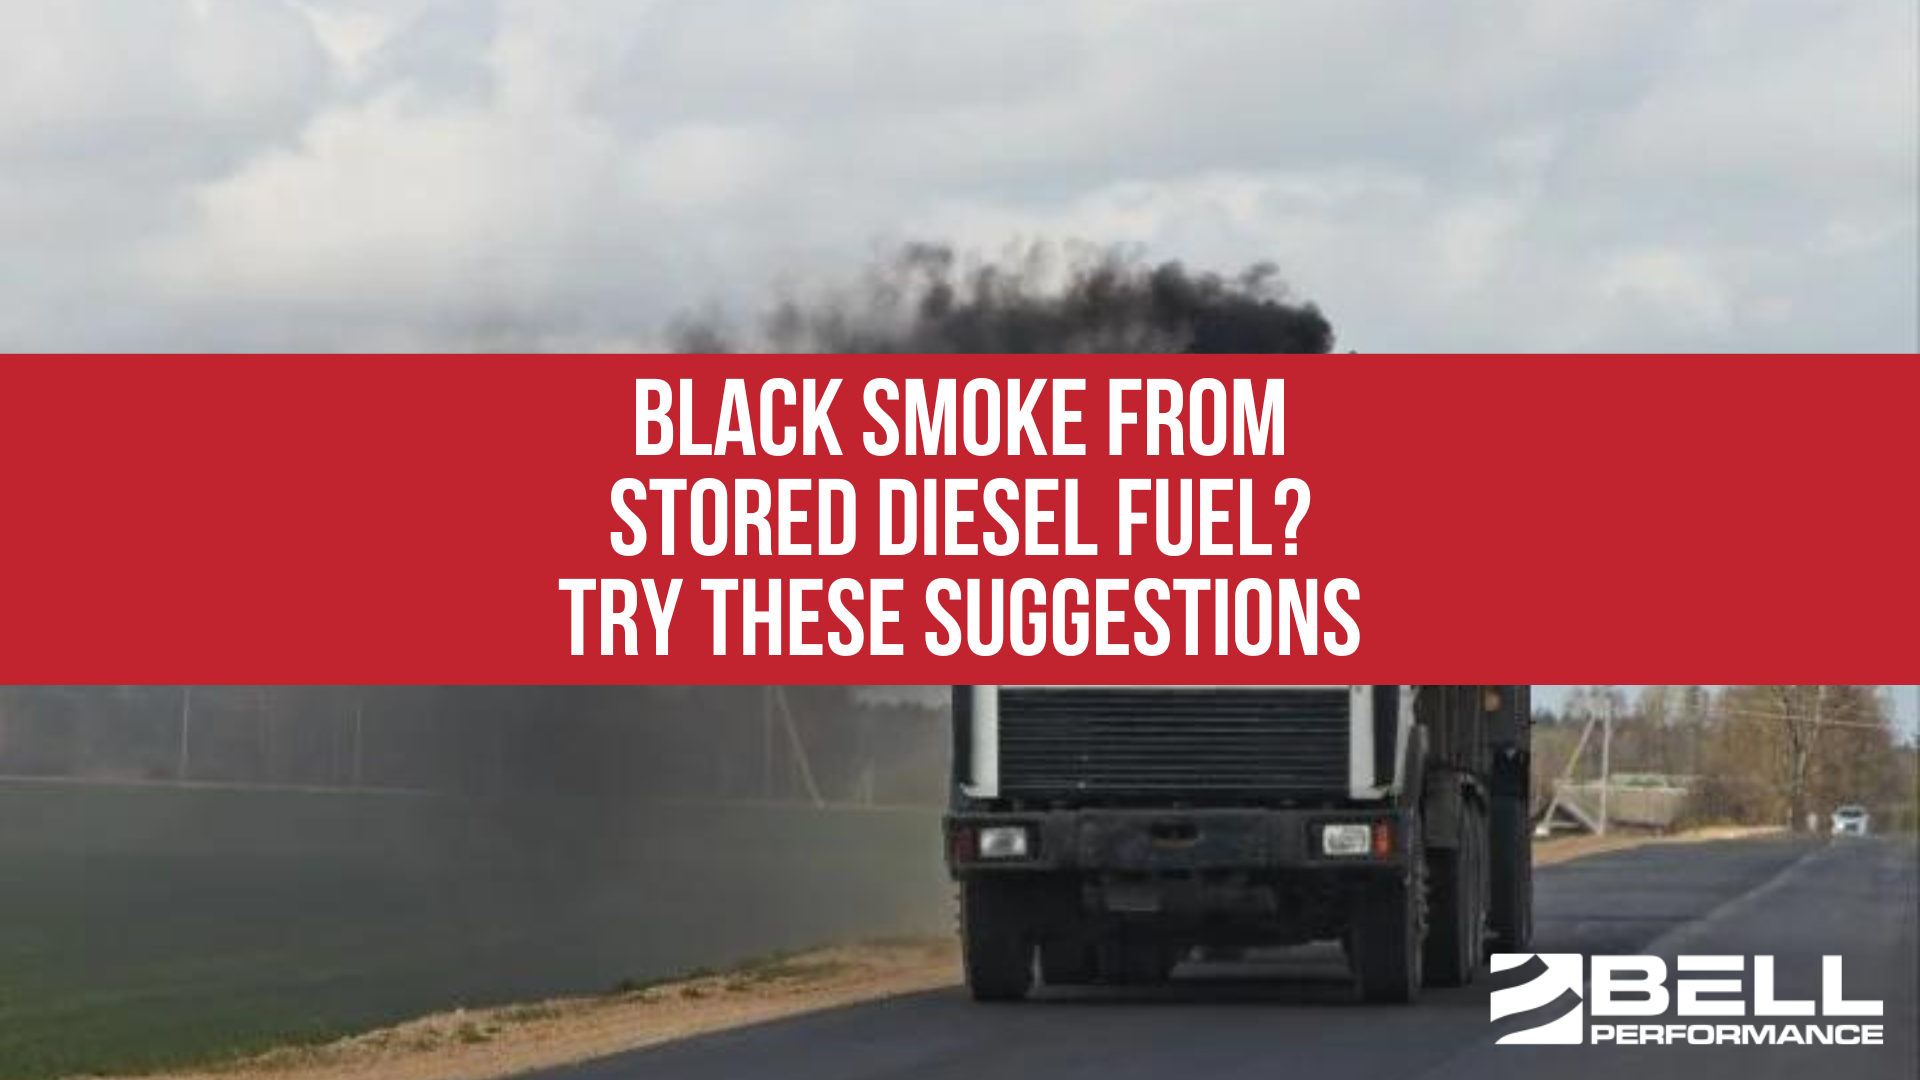 Black Smoke From Stored Diesel Fuel? Try These Suggestions